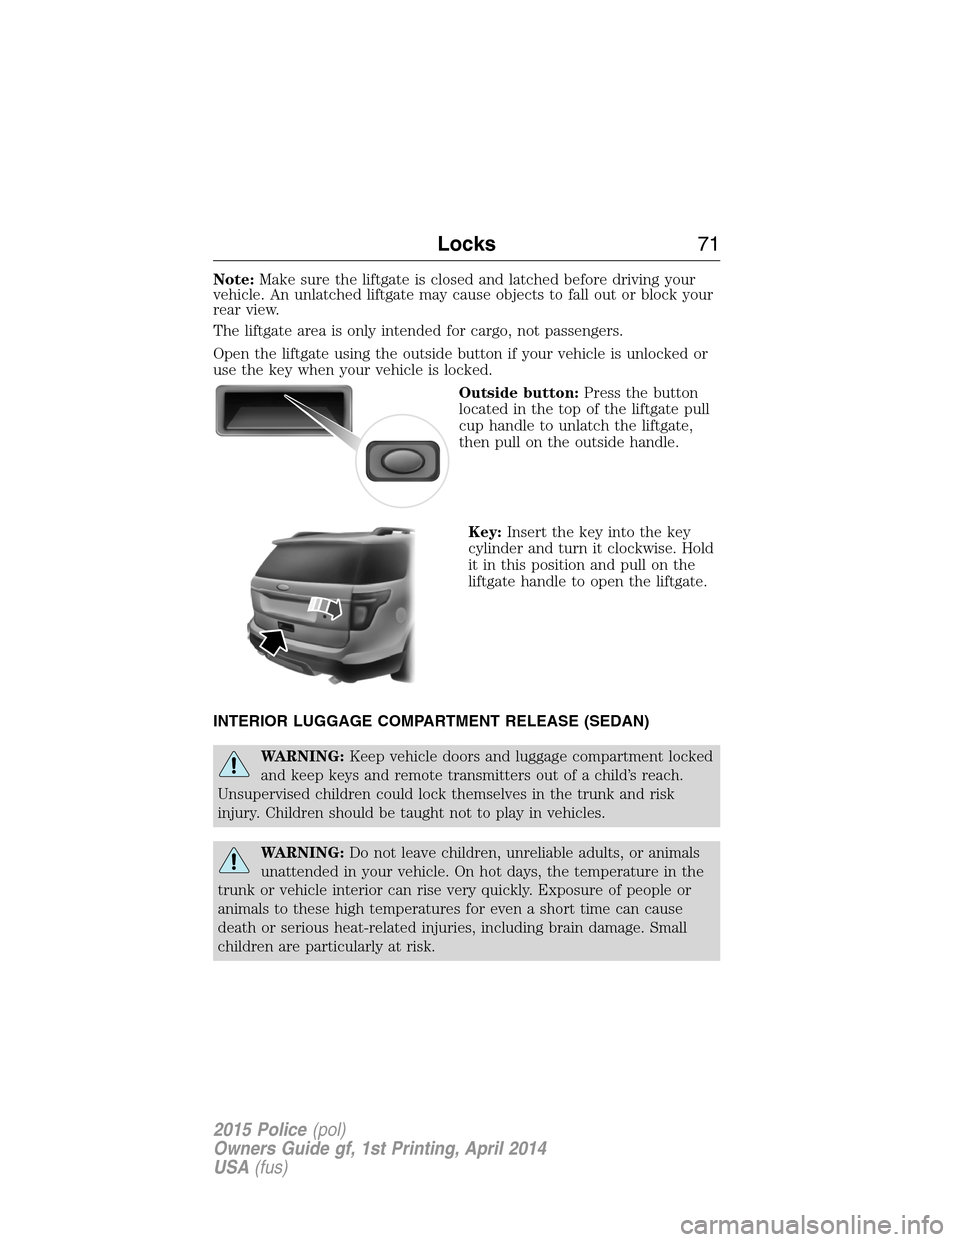 FORD POLICE INTERCEPTOR UTILITY 2015 1.G Owners Manual Note:Make sure the liftgate is closed and latched before driving your
vehicle. An unlatched liftgate may cause objects to fall out or block your
rear view.
The liftgate area is only intended for cargo